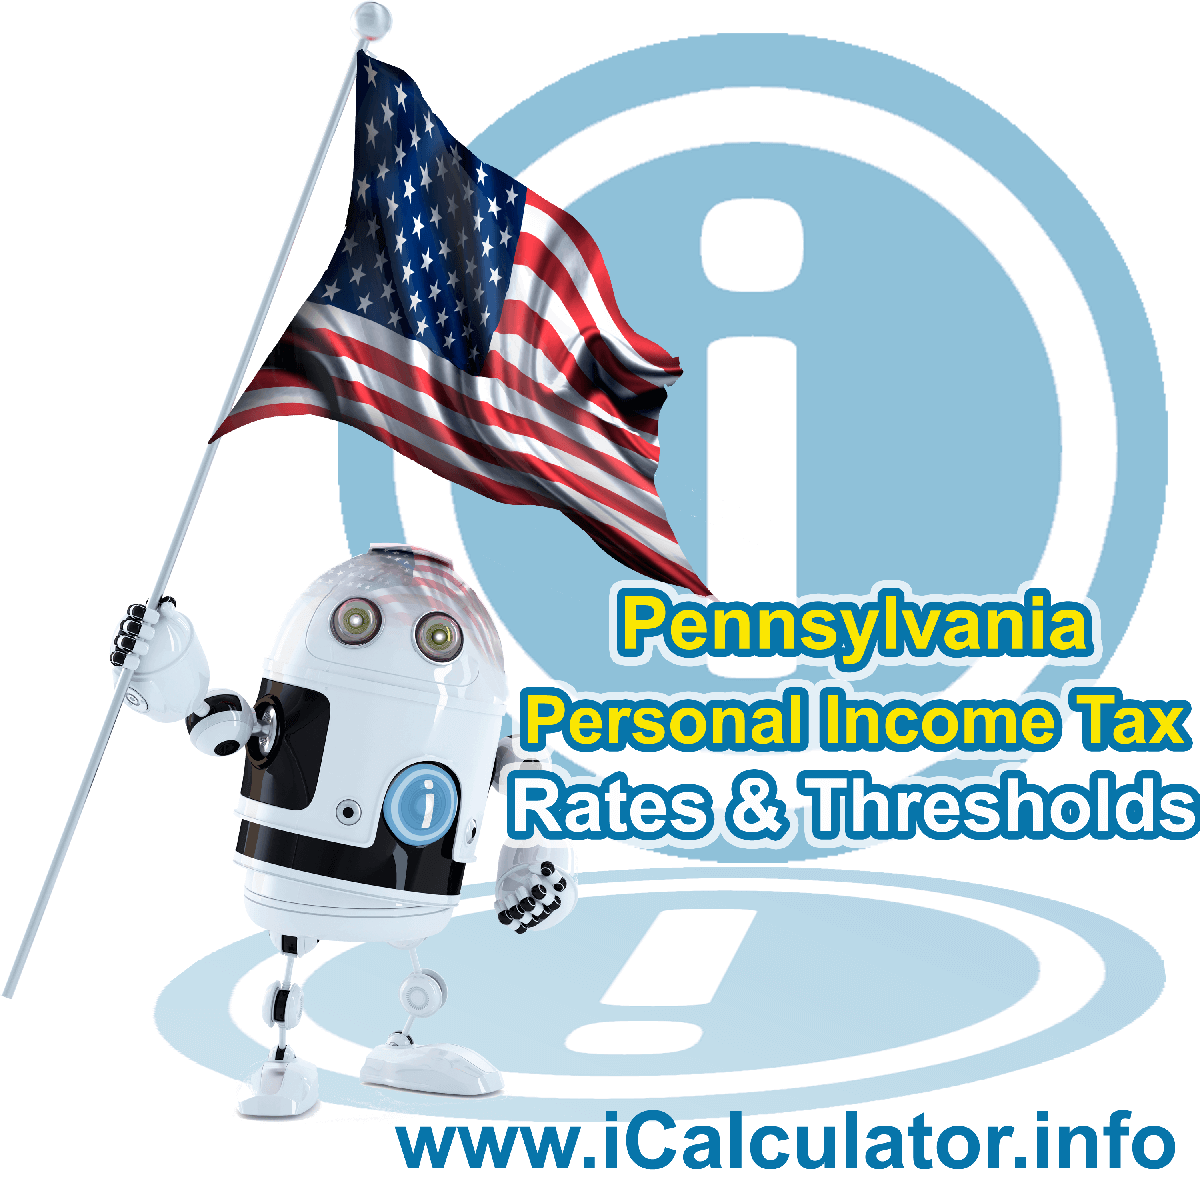 Pennsylvania State Tax Tables 2022. This image displays details of the Pennsylvania State Tax Tables for the 2022 tax return year which is provided in support of the 2022 US Tax Calculator